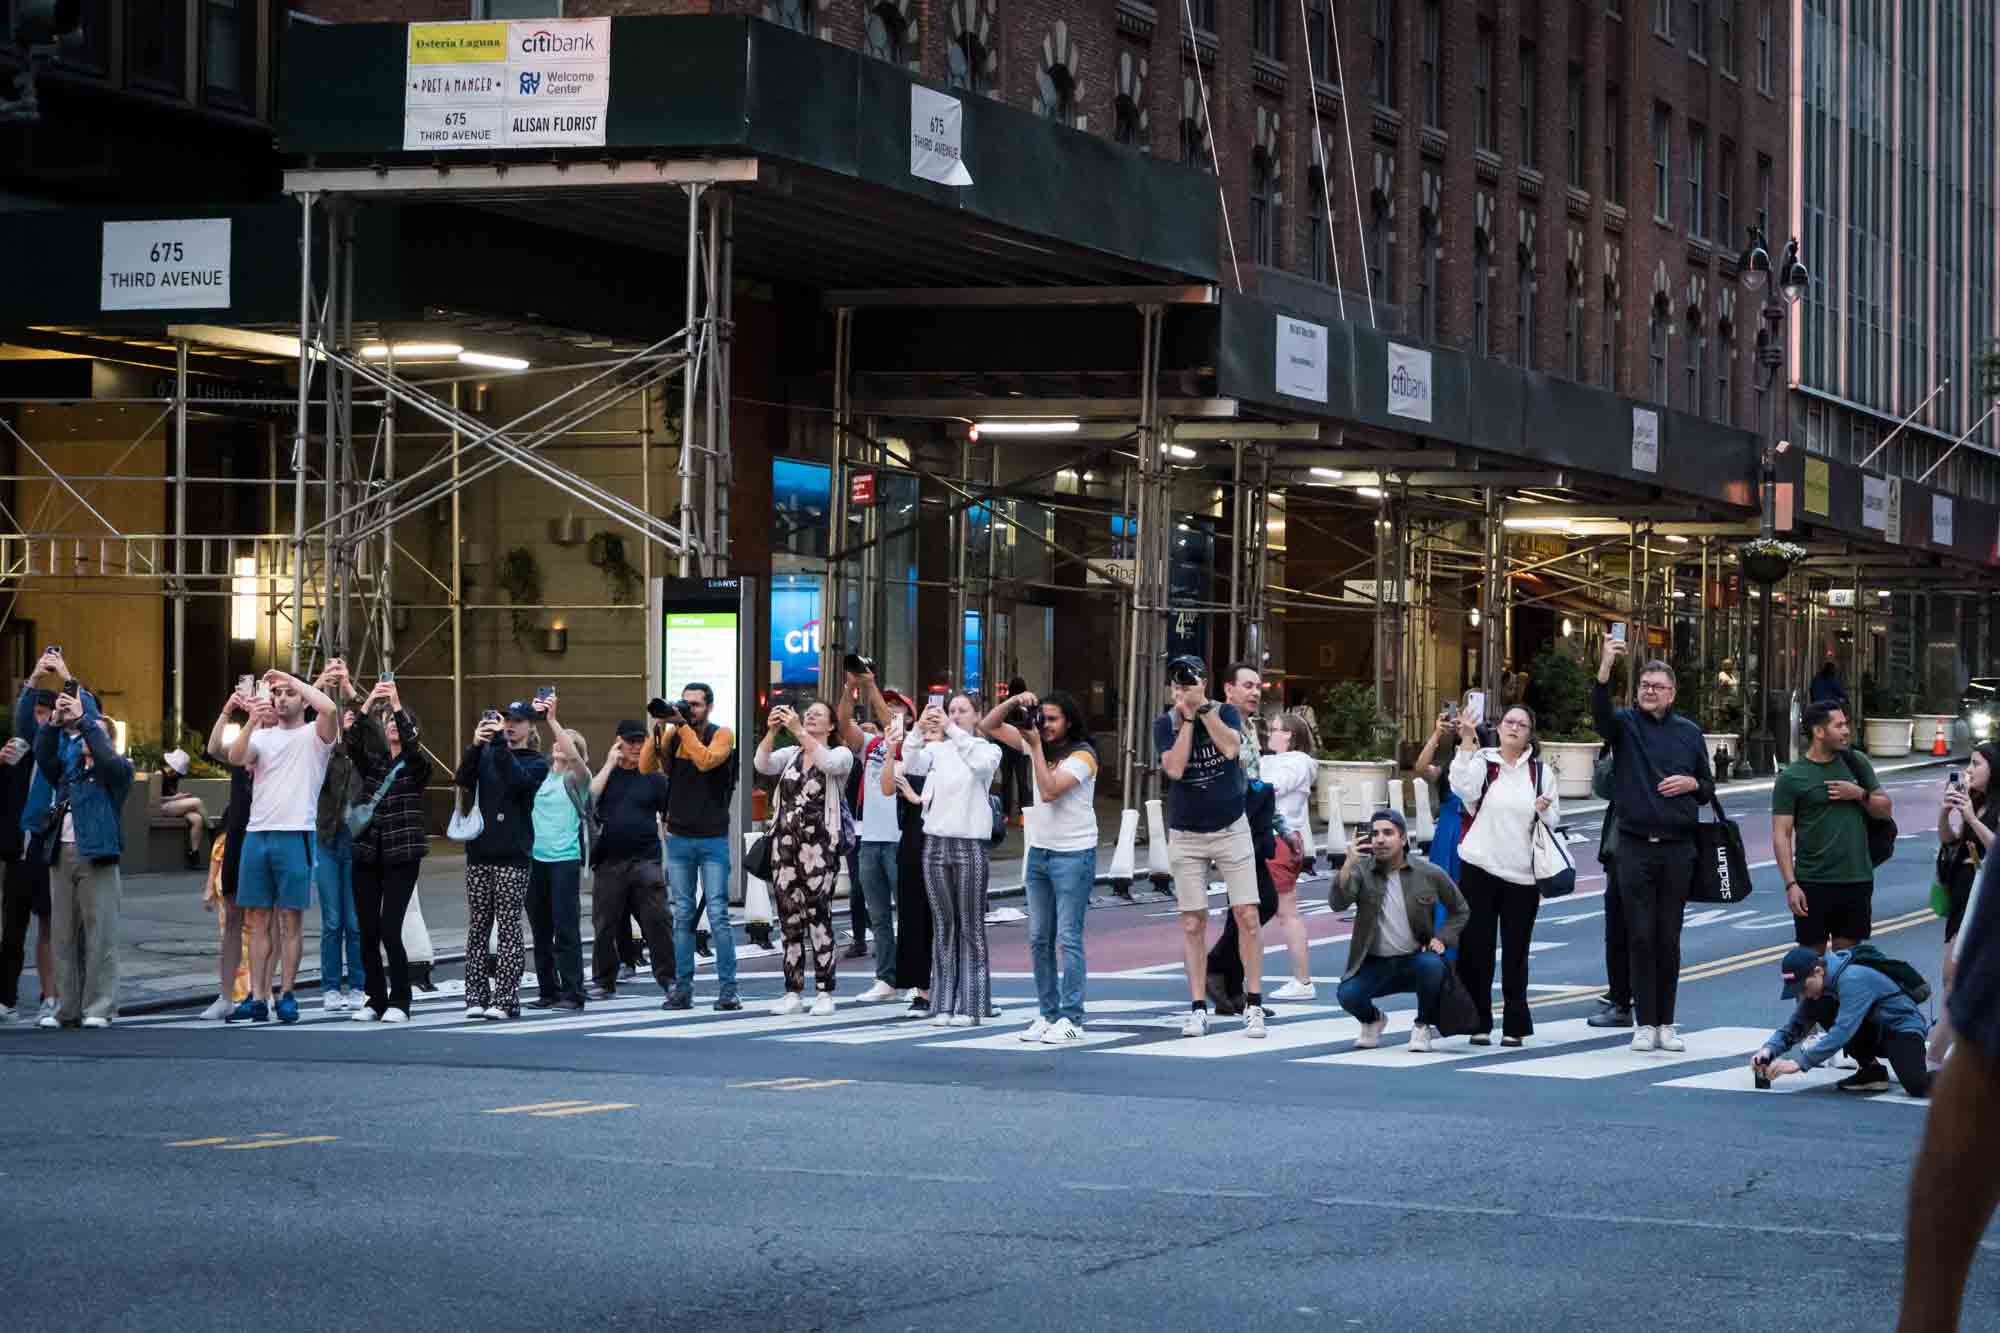 Tourists in a NYC crosswalk with cellphones in hand during Manhattanhenge